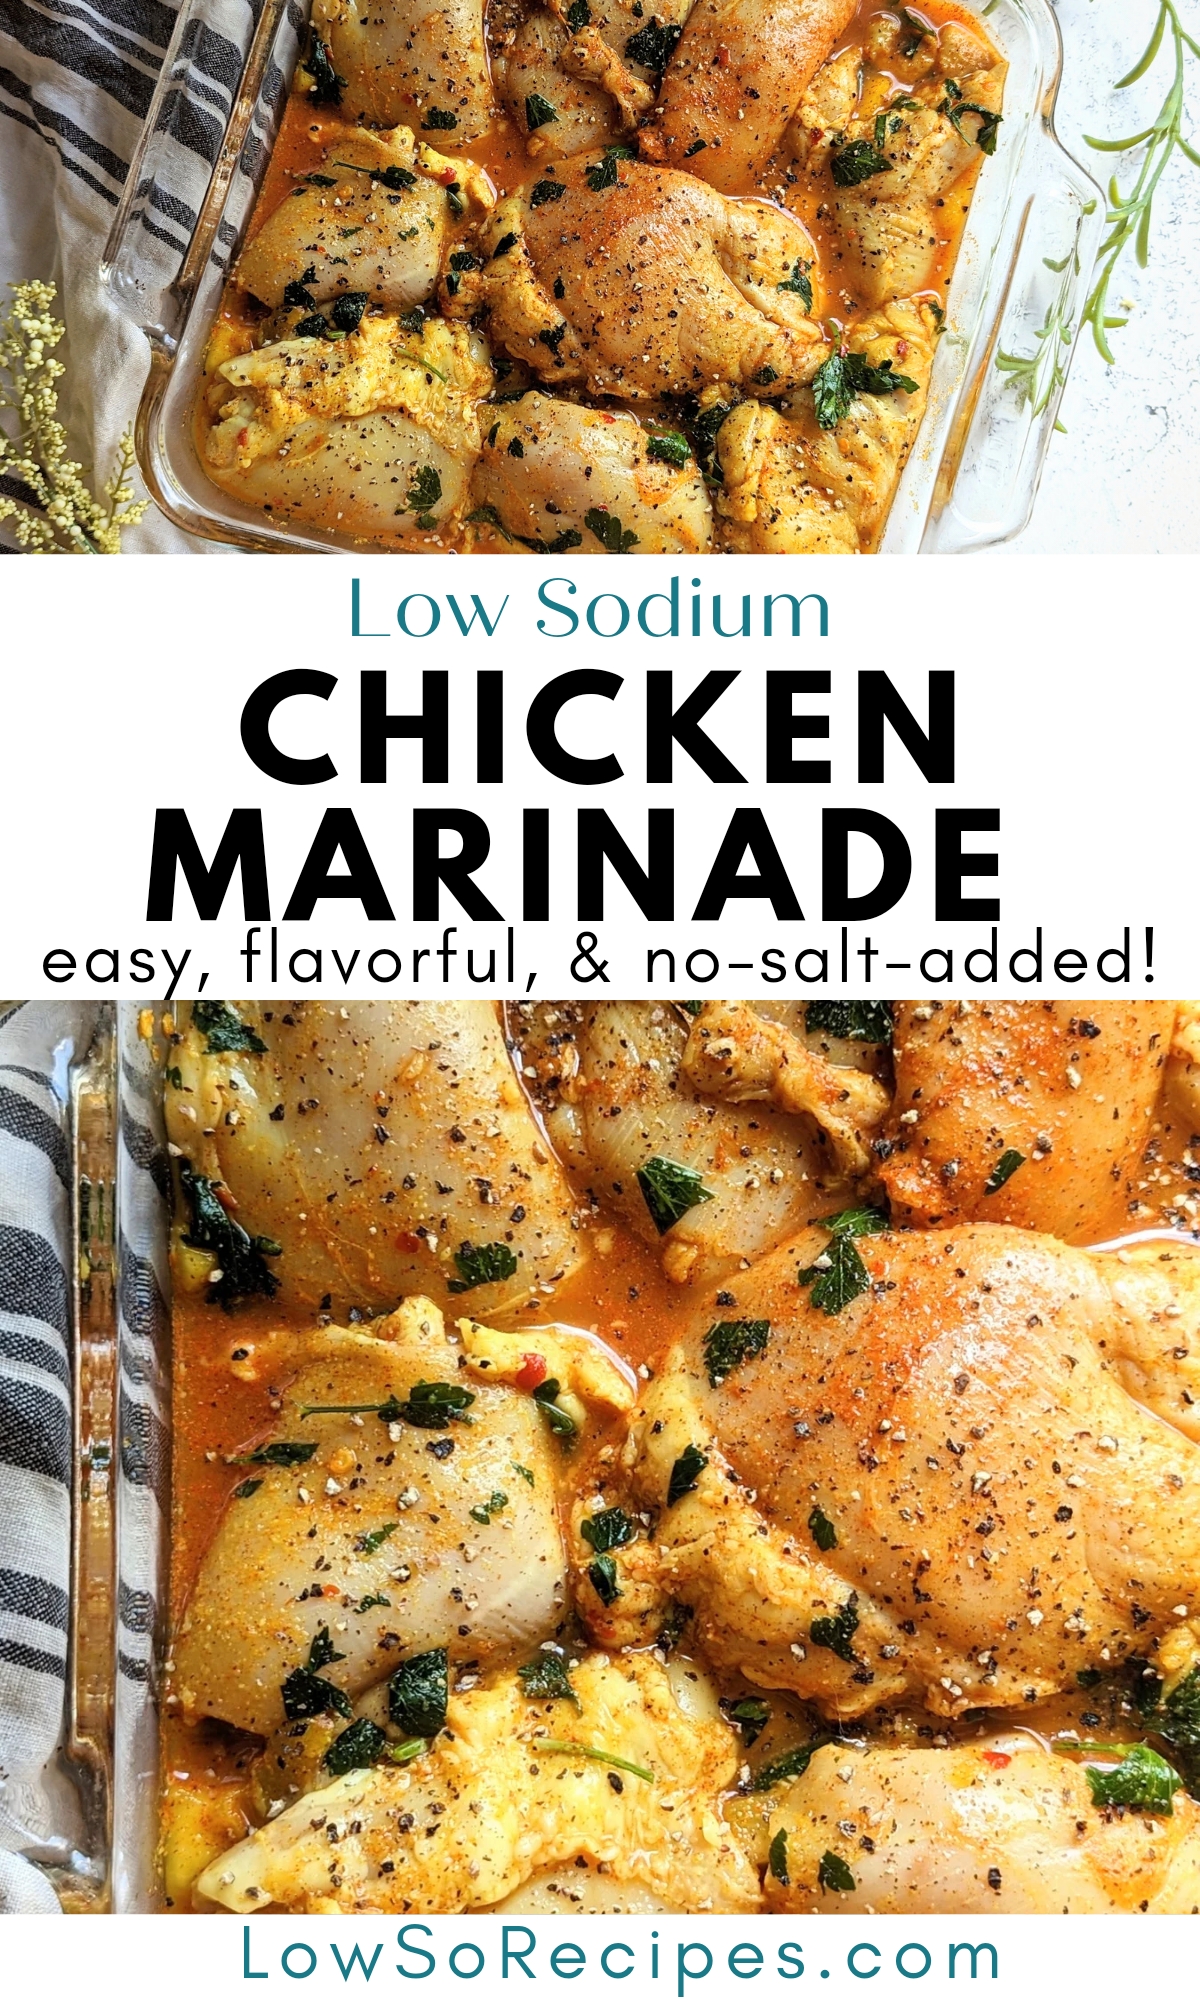 low sodium chicken marinade recipe an easy flavorful and no salt added marinade ideas for chicken.